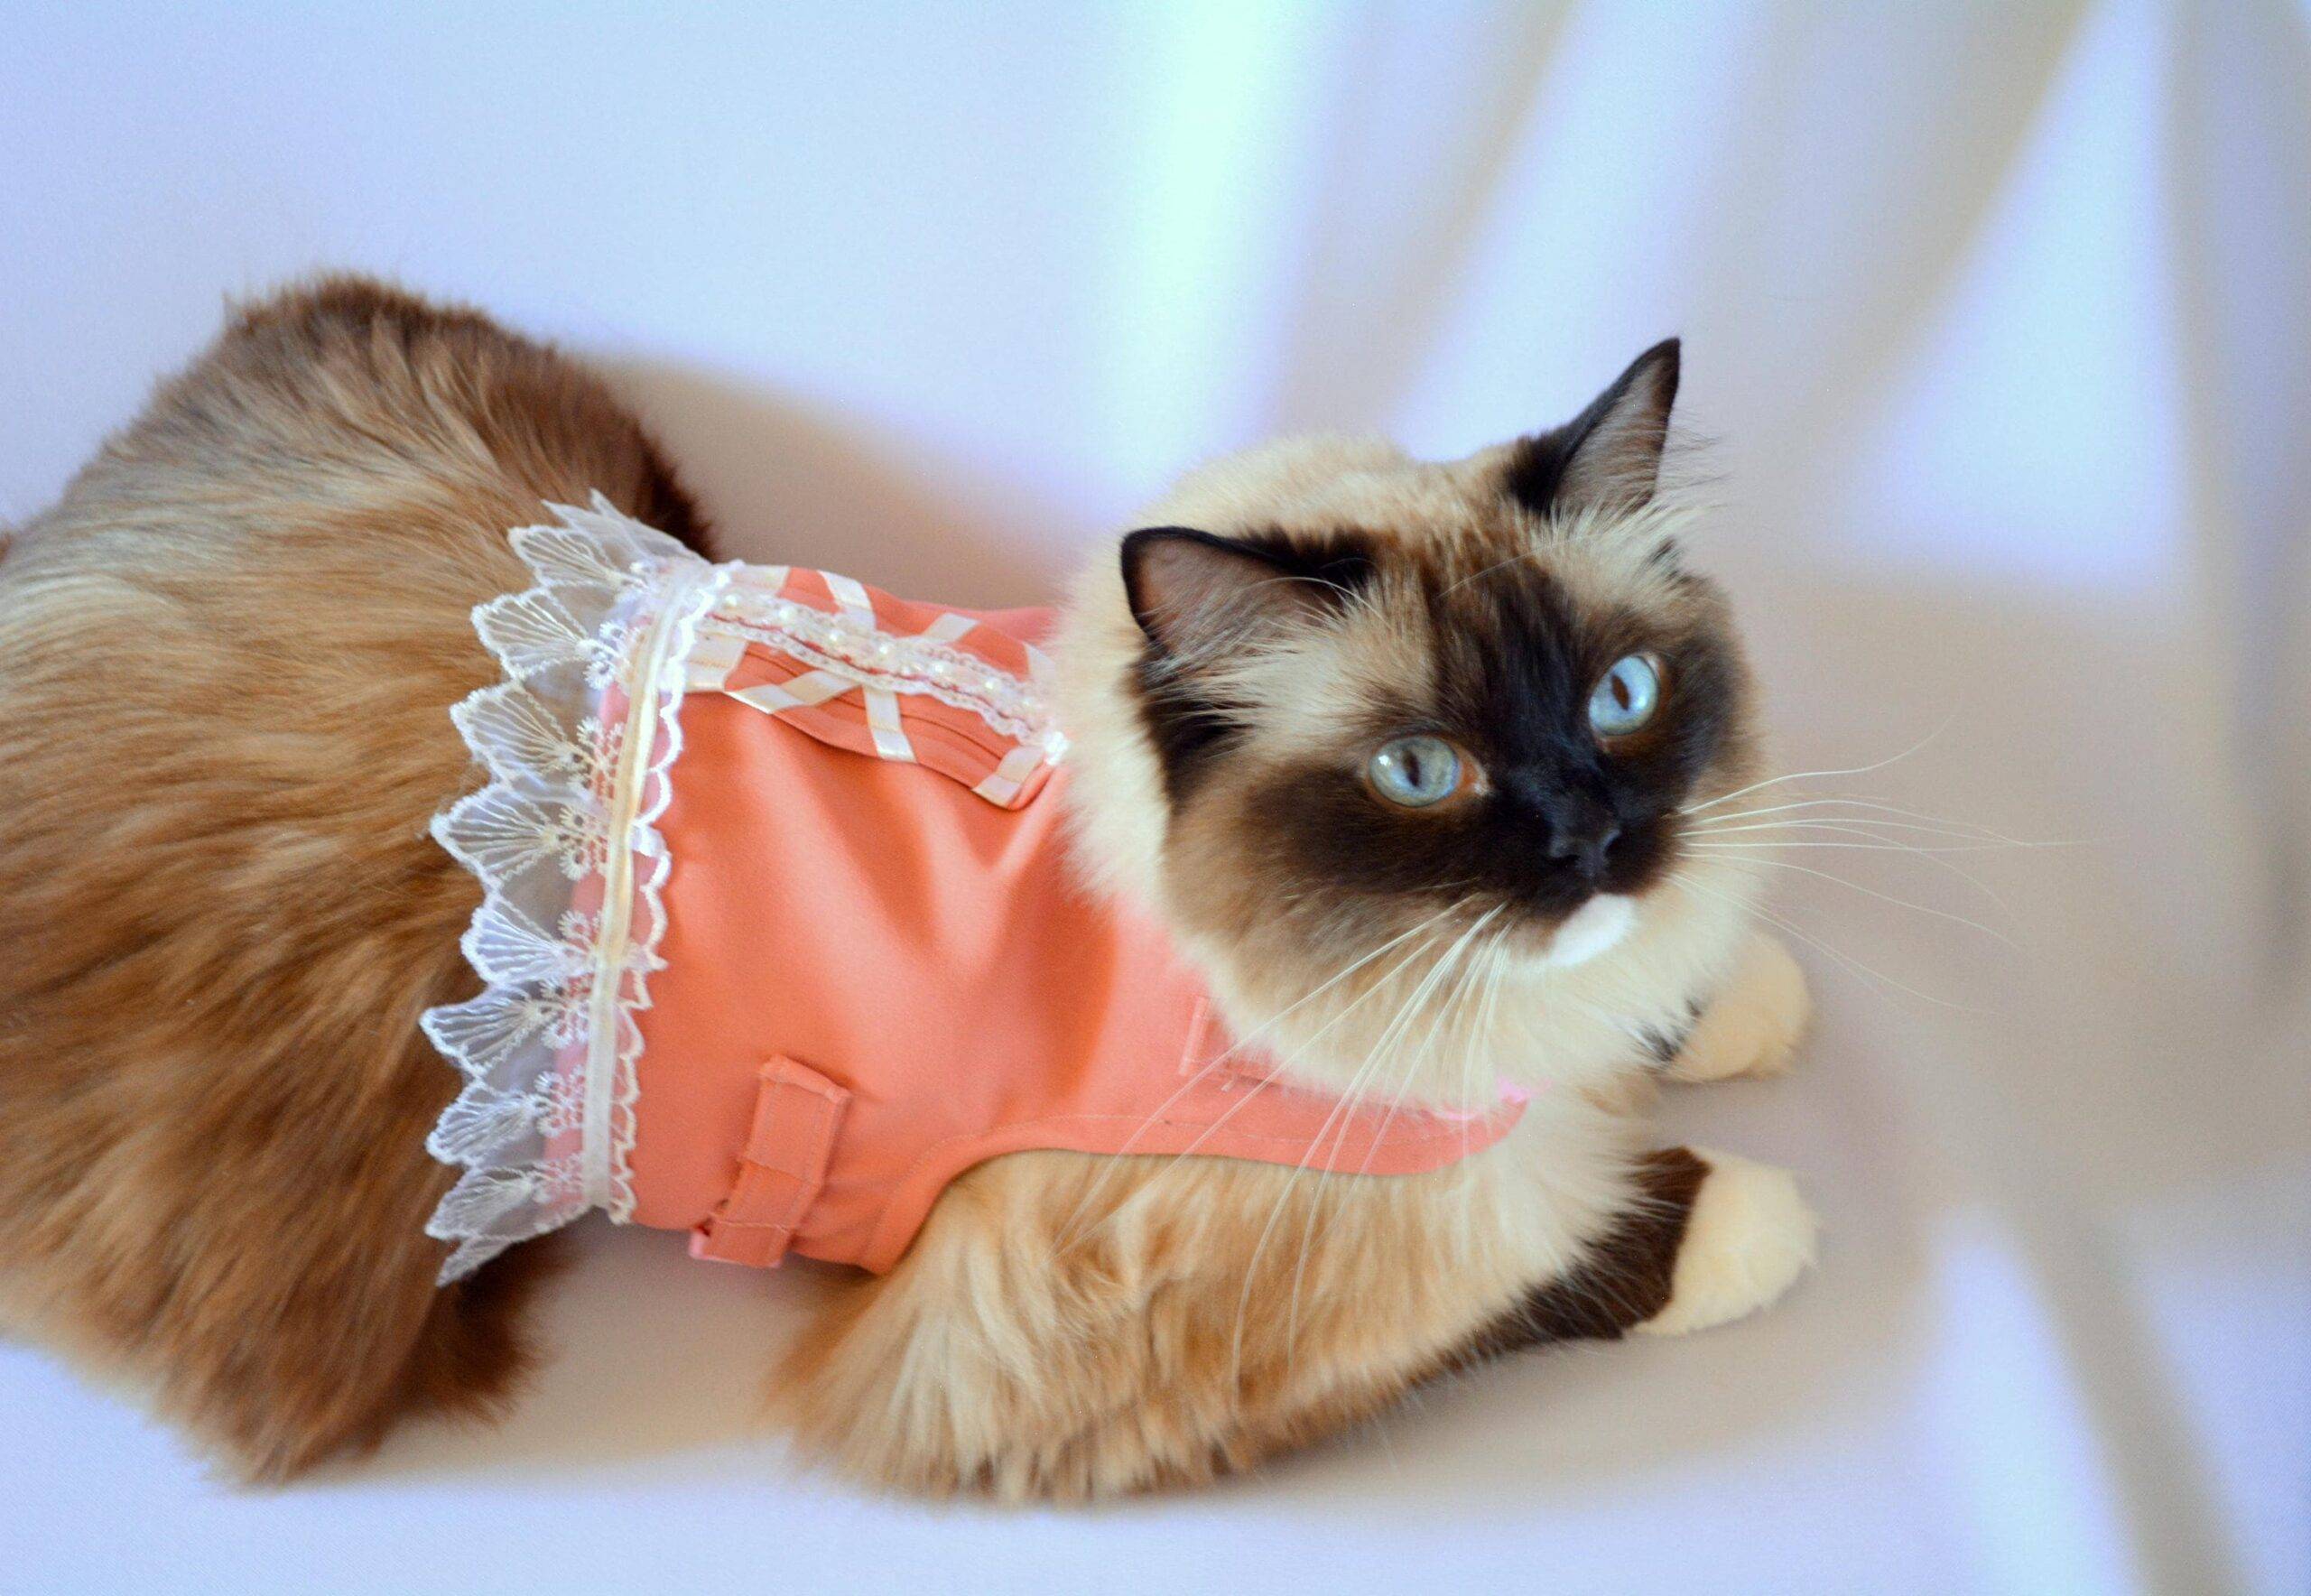 Pet costume ‘Afternoon Tea’ harness in peach, cat costume, dog costume decorative harness for cat – handmade by Crafts4Cats